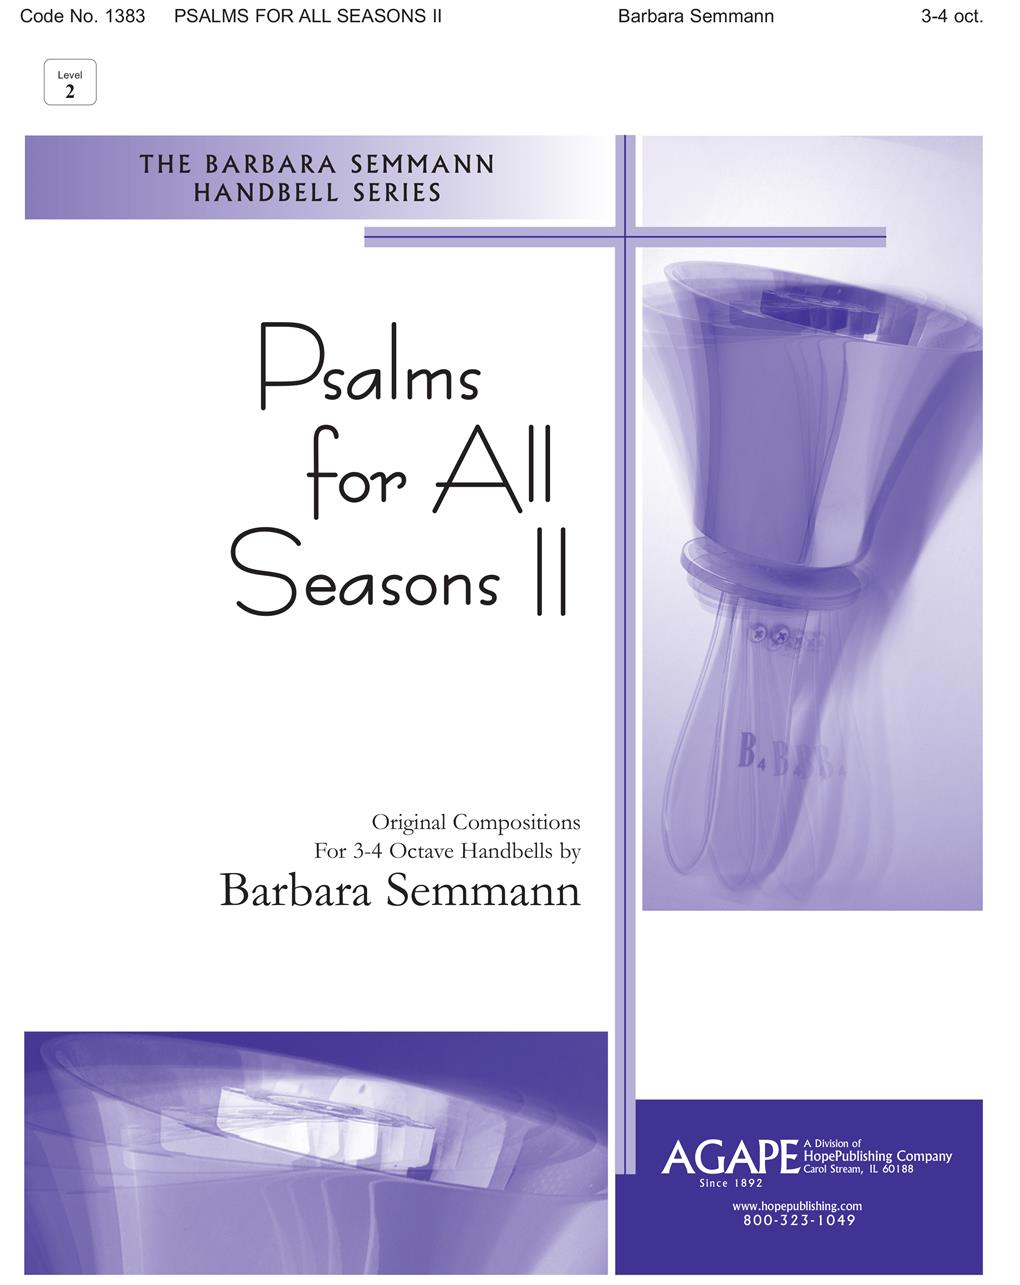 Psalms for All Seasons II - 3-4 Oct. Cover Image